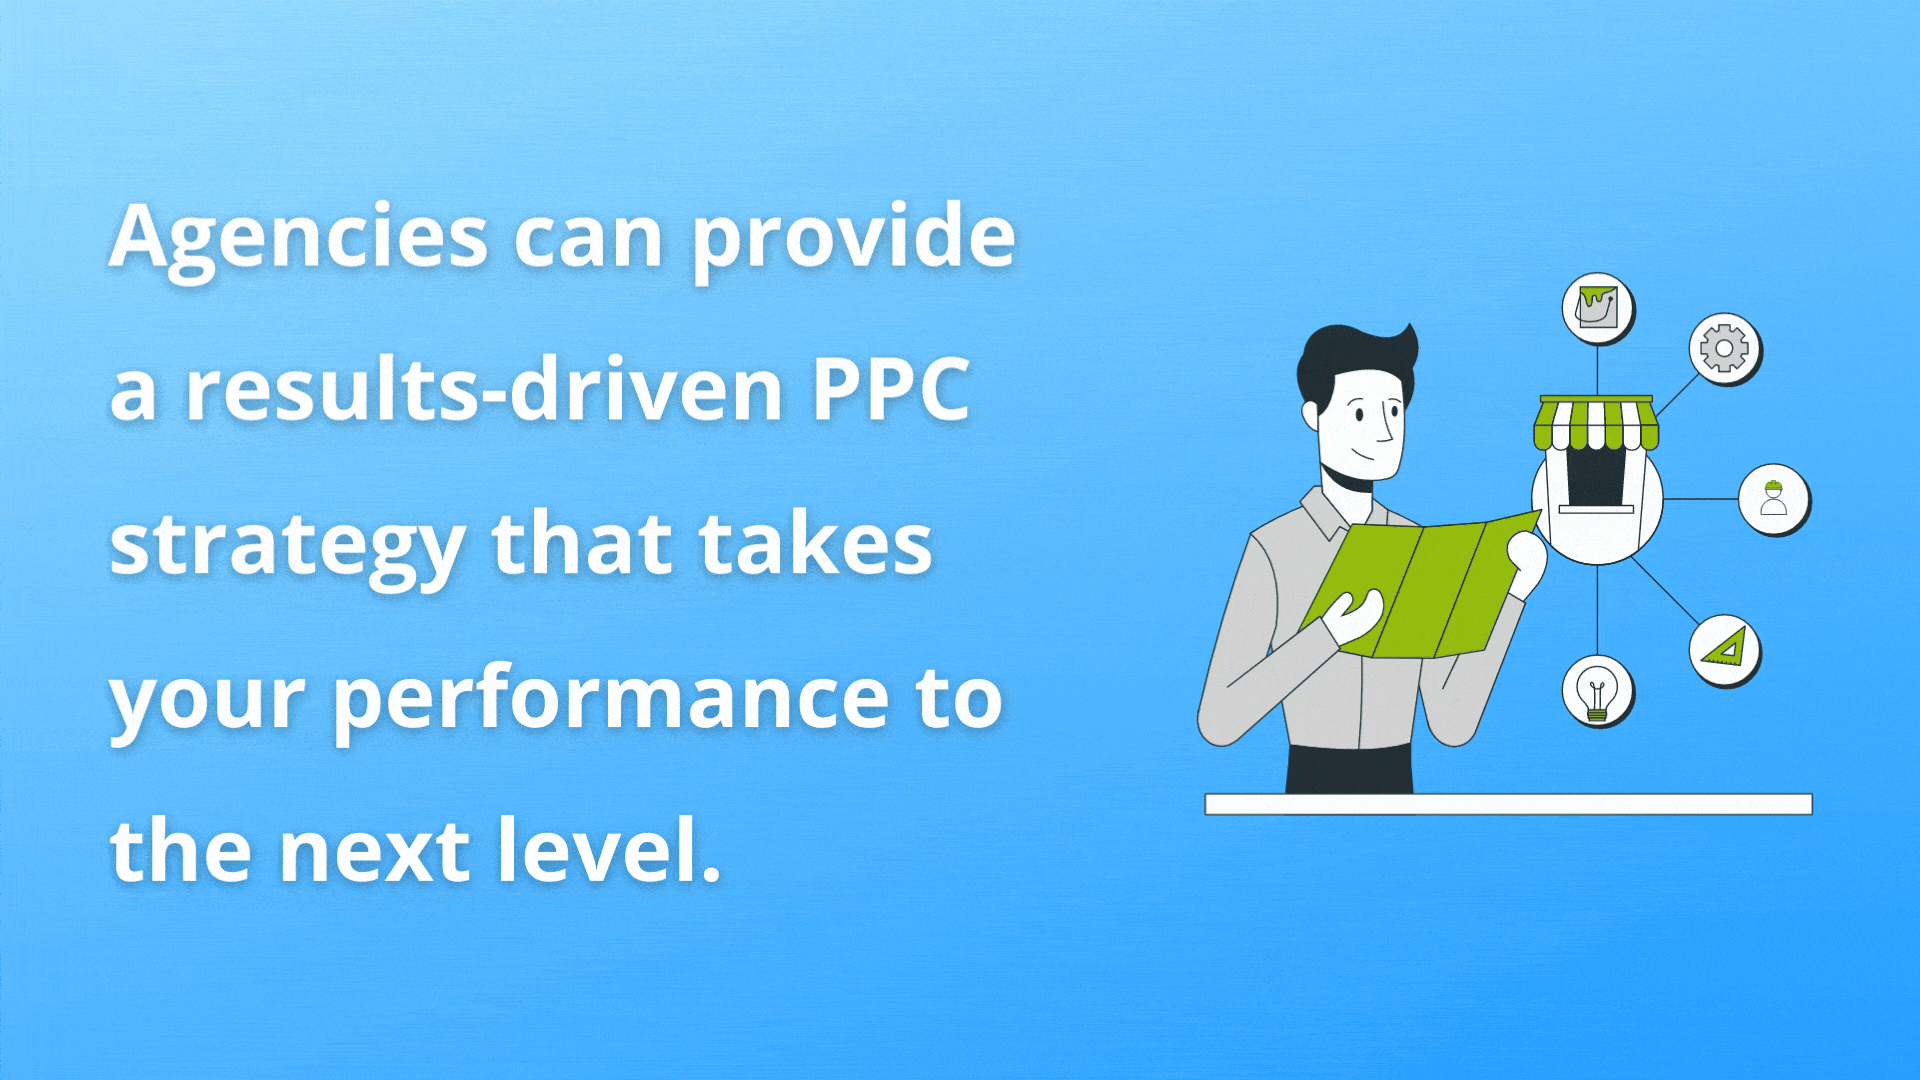 Marketing agencies can provide results-driven PPC strategy